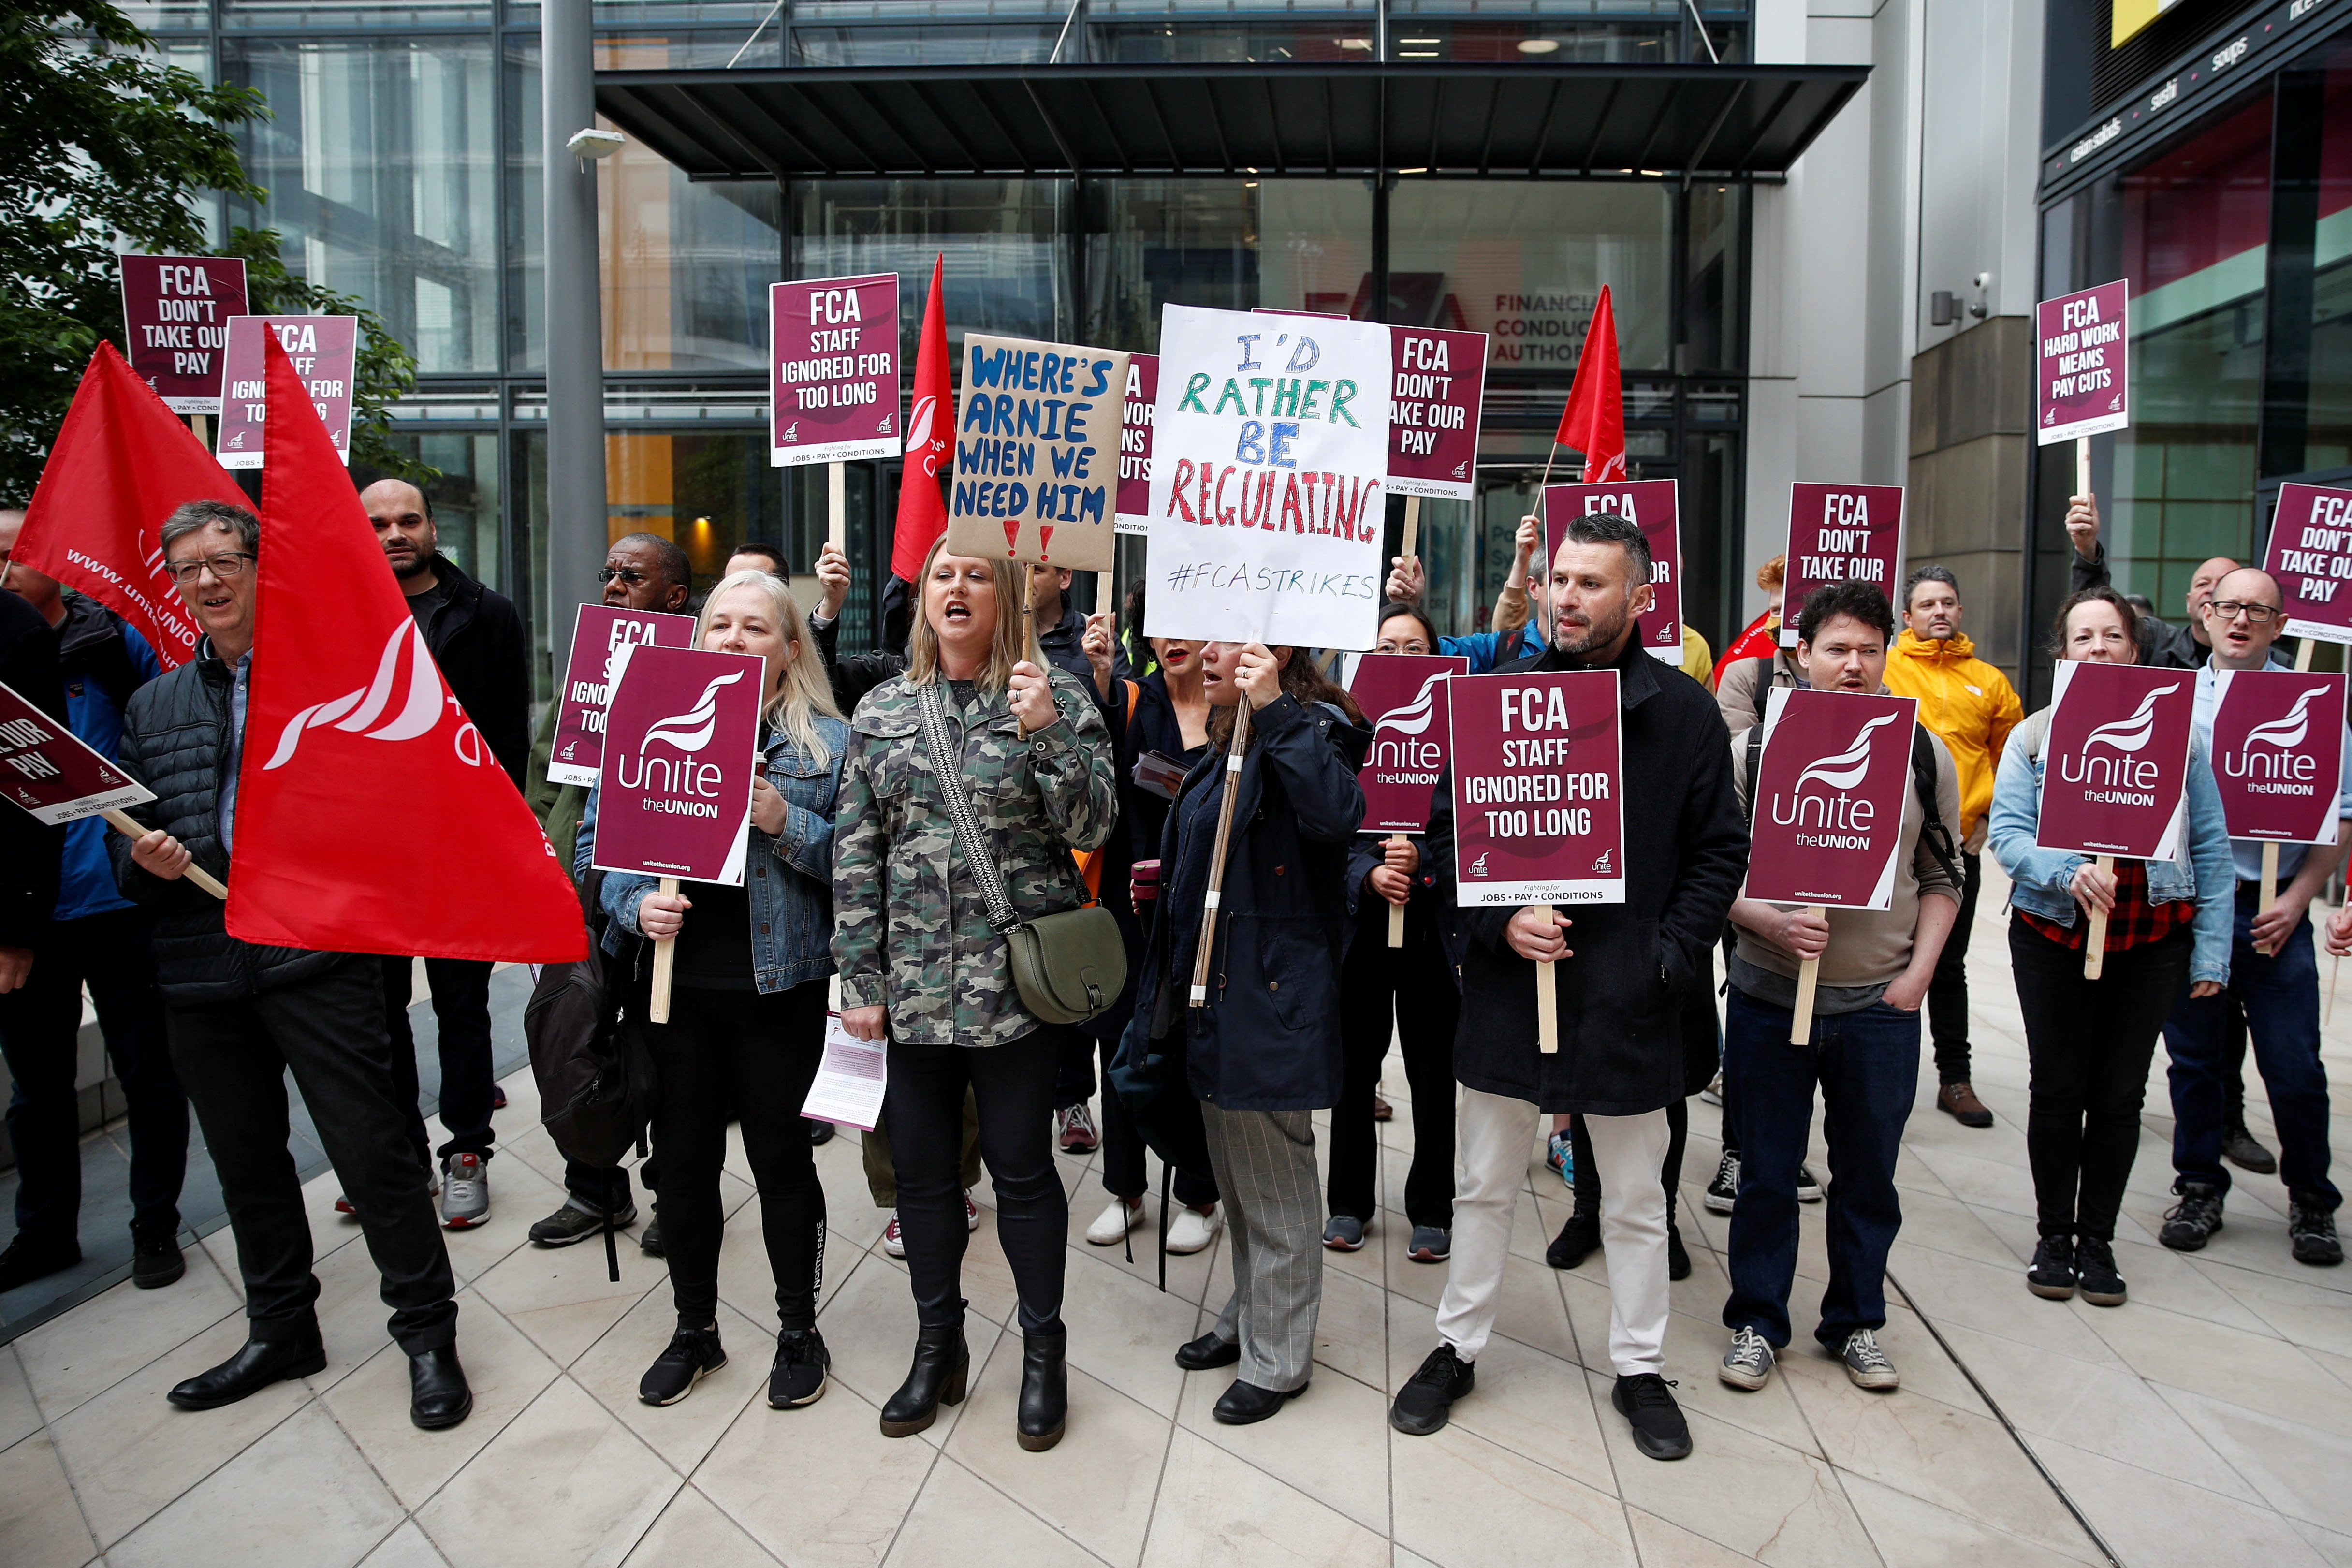 Unite launches campaign over FCA pay package